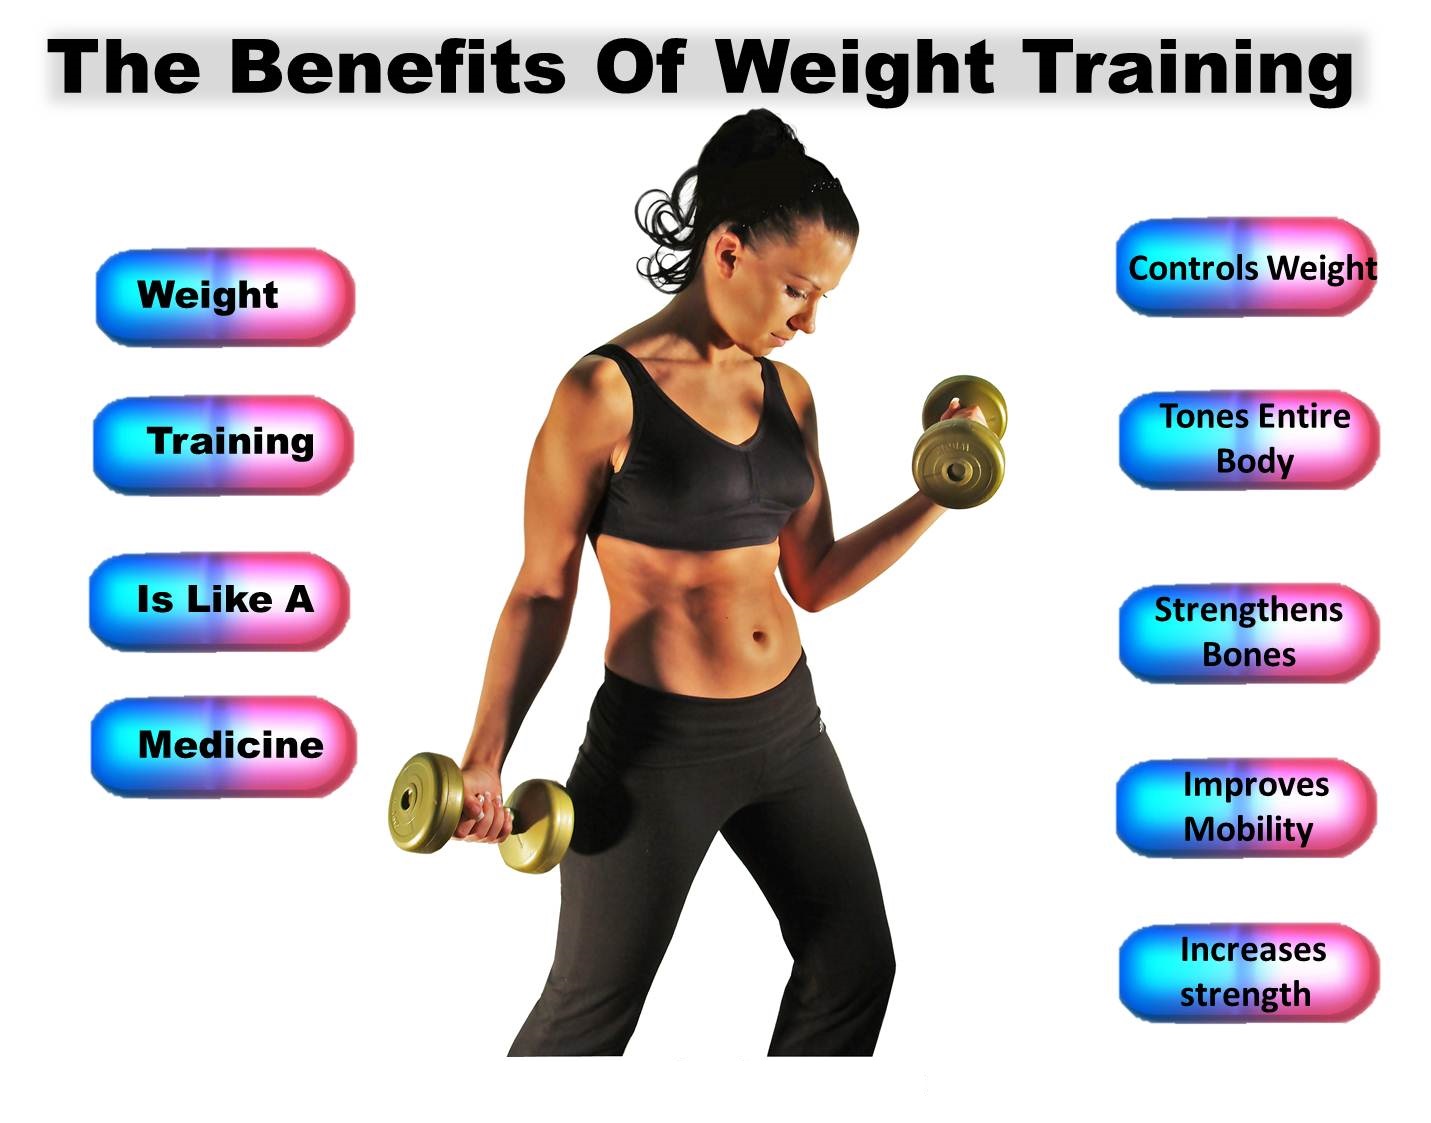 The Benefits Of Weight Training – At A Glance